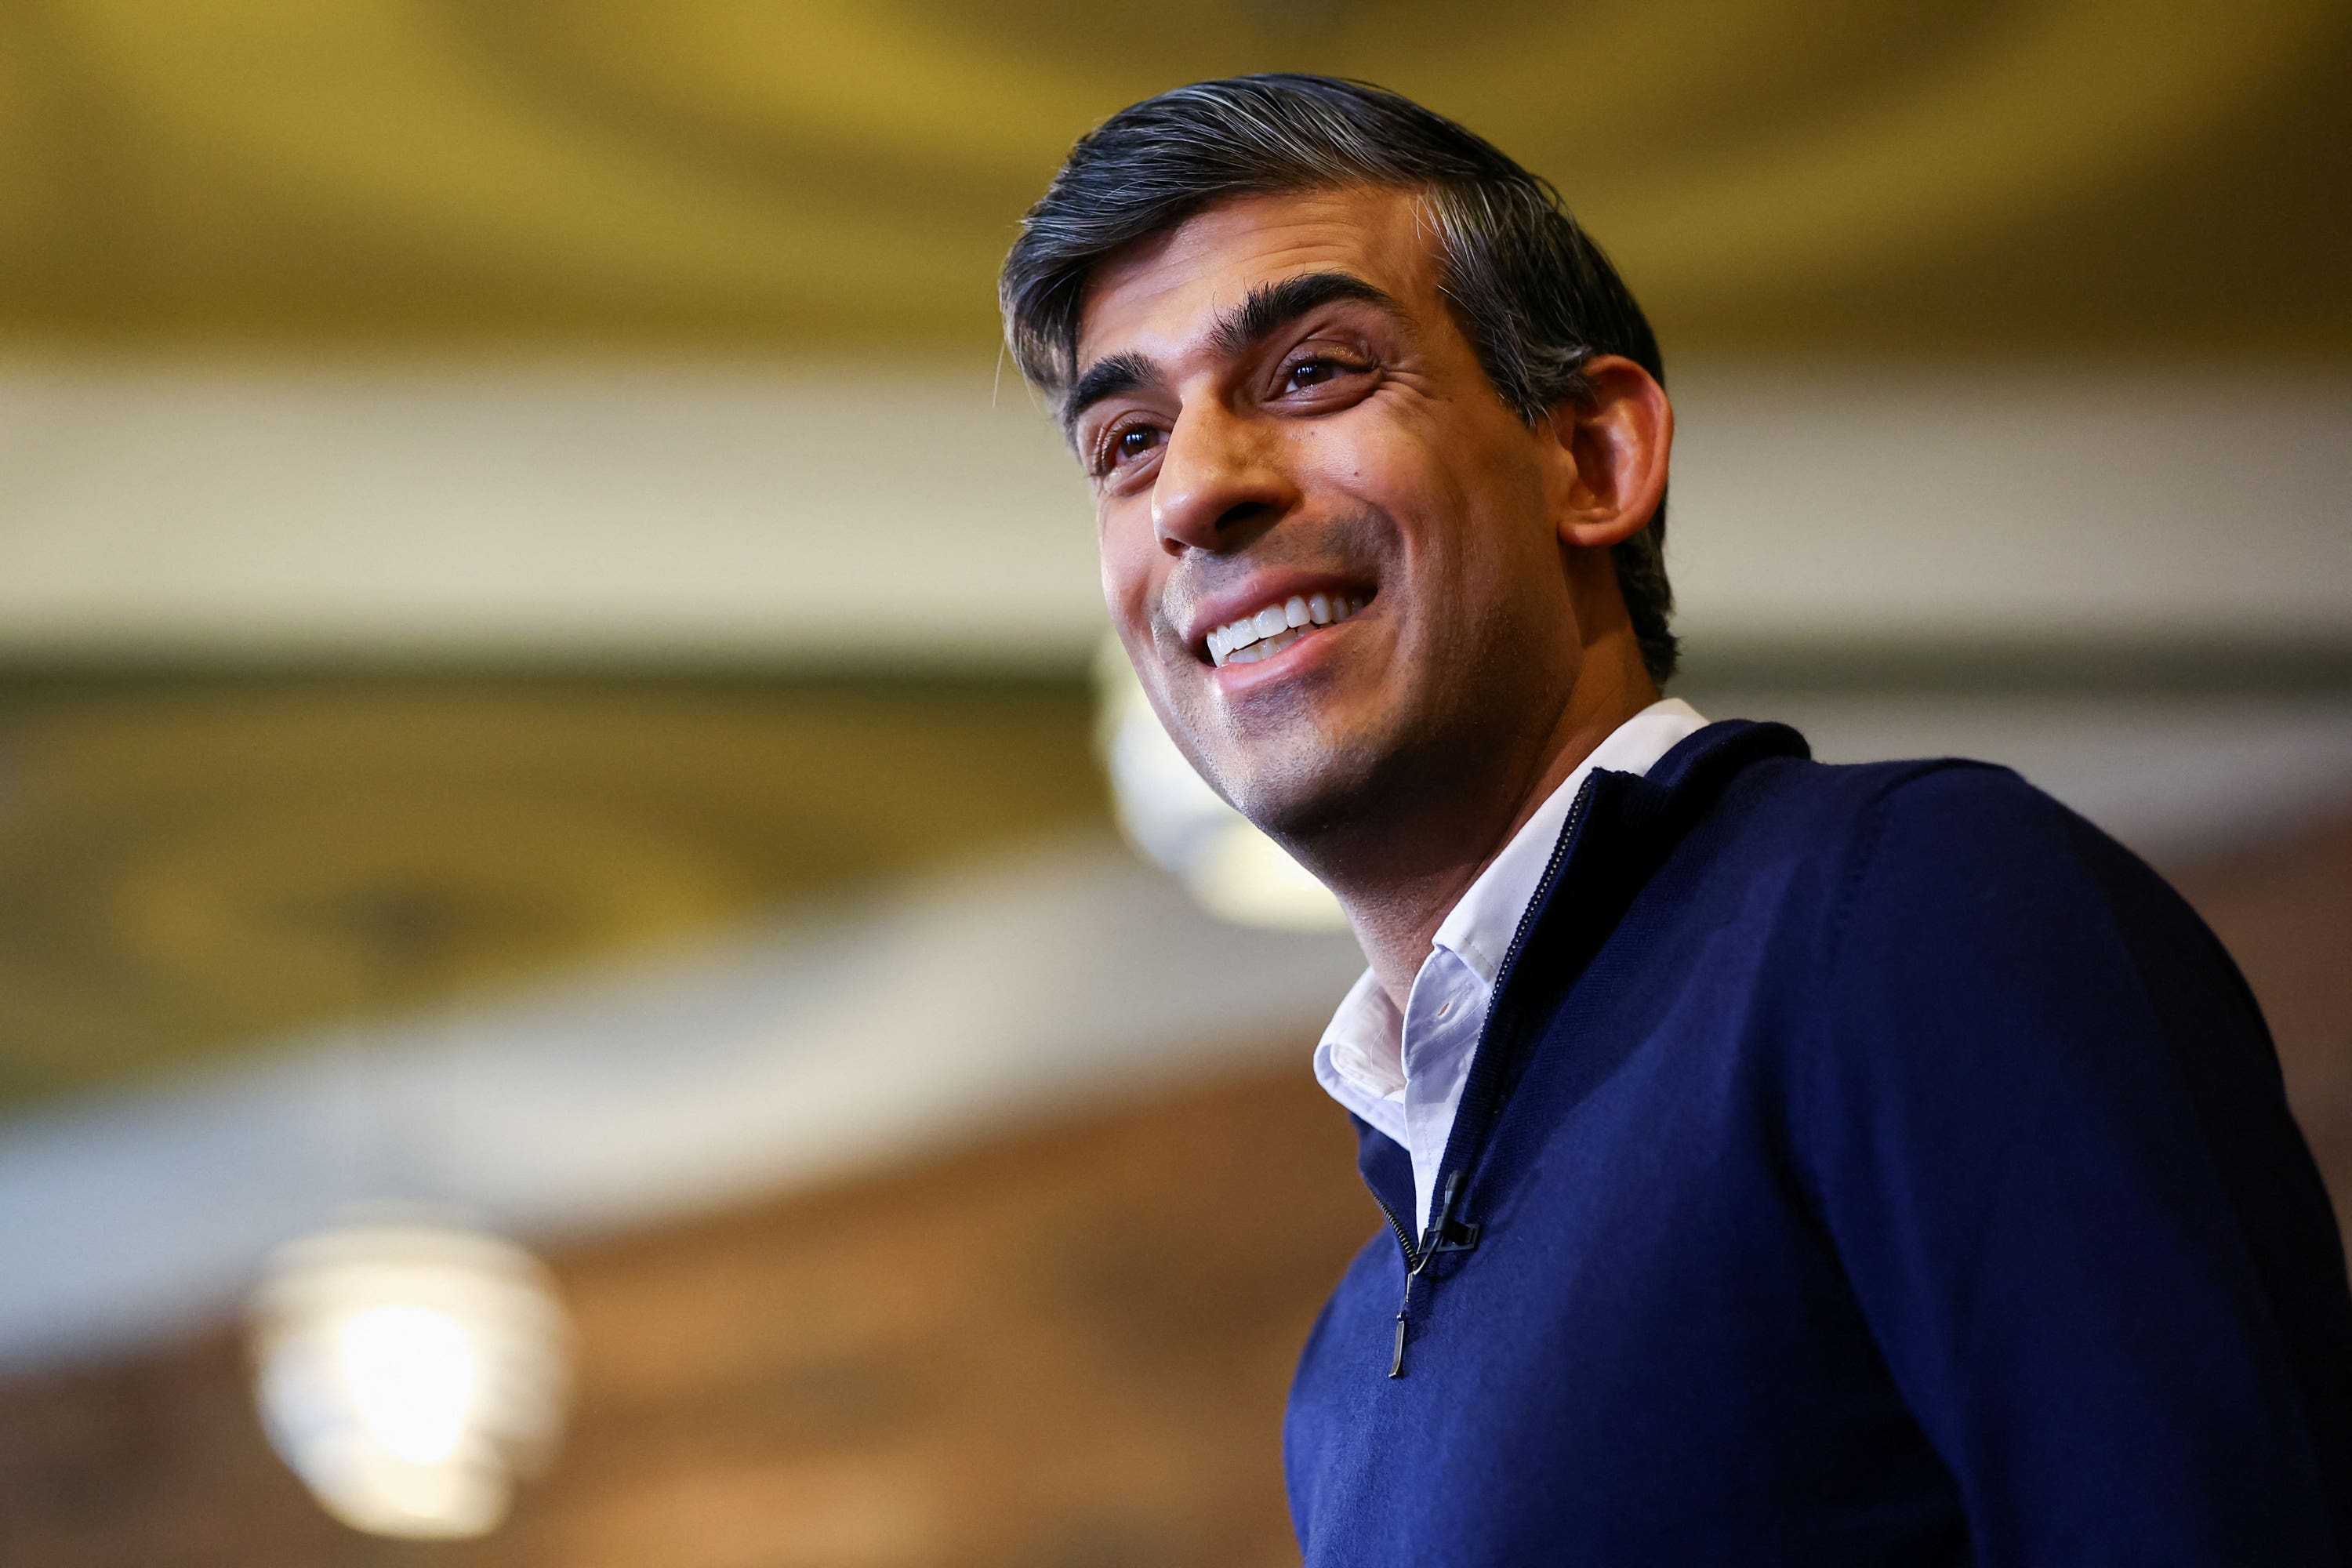 Prime Minister Rishi Sunak said ‘significant progress’ could be made towards the goal of eliminating the tax during the next parliament if his party remains in power (Carl Recine/PA)